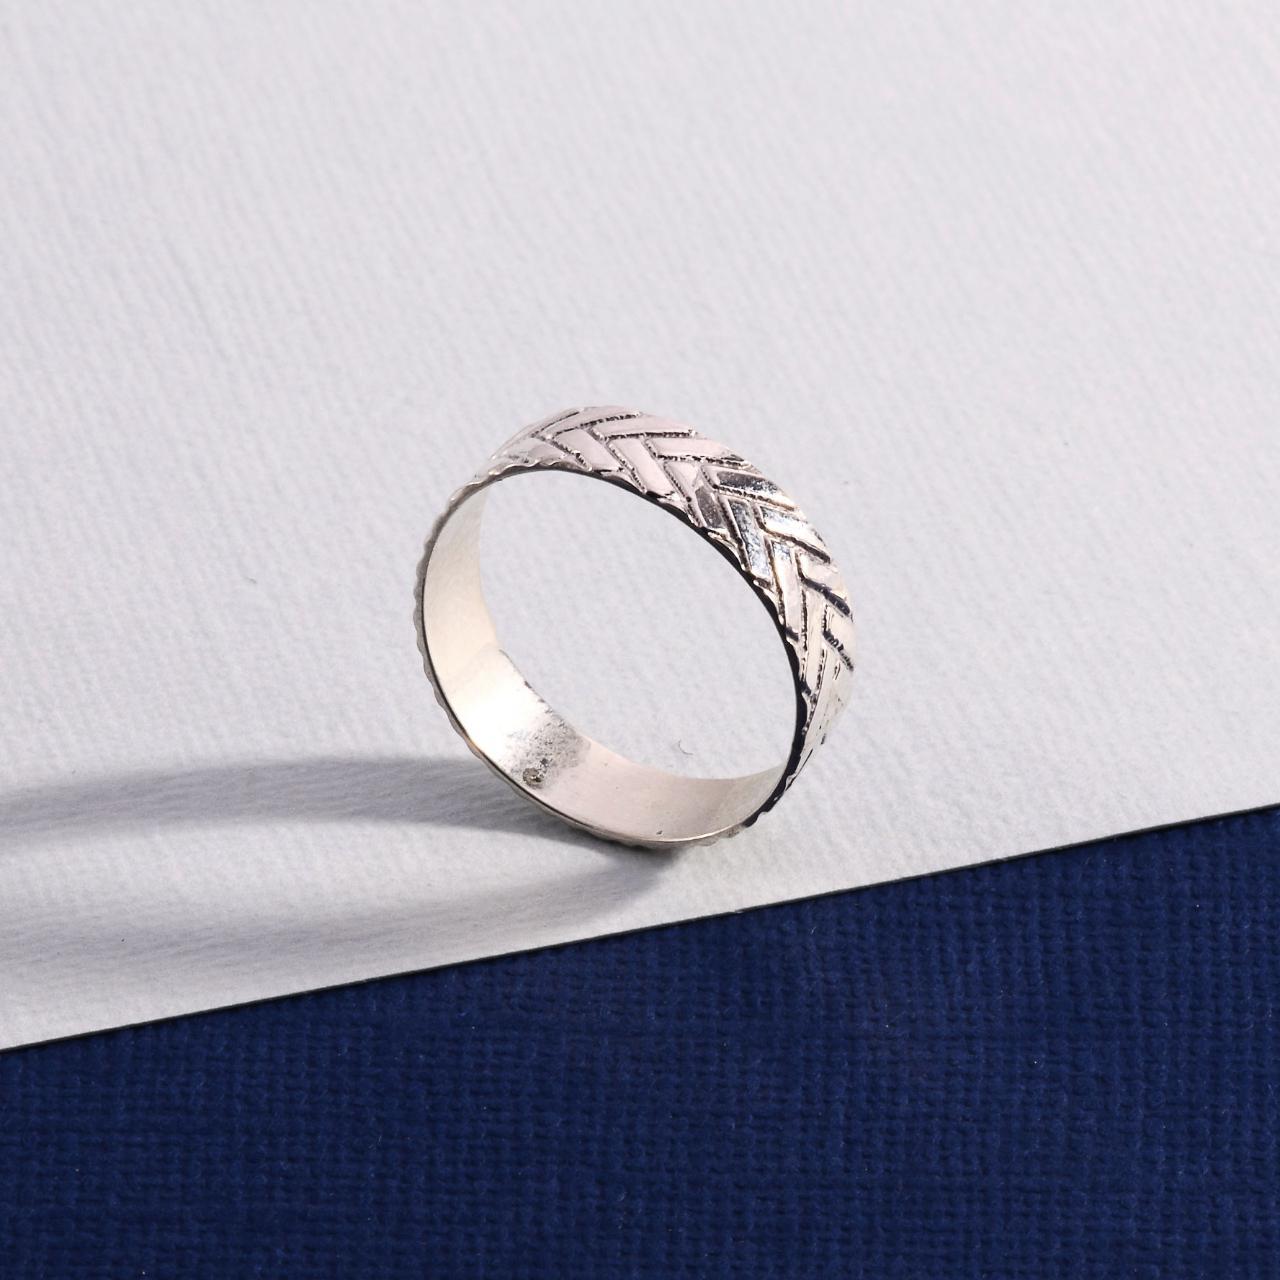 Product Image 2 - Sterling Silver Ring

Size 8.5

925 Symbol